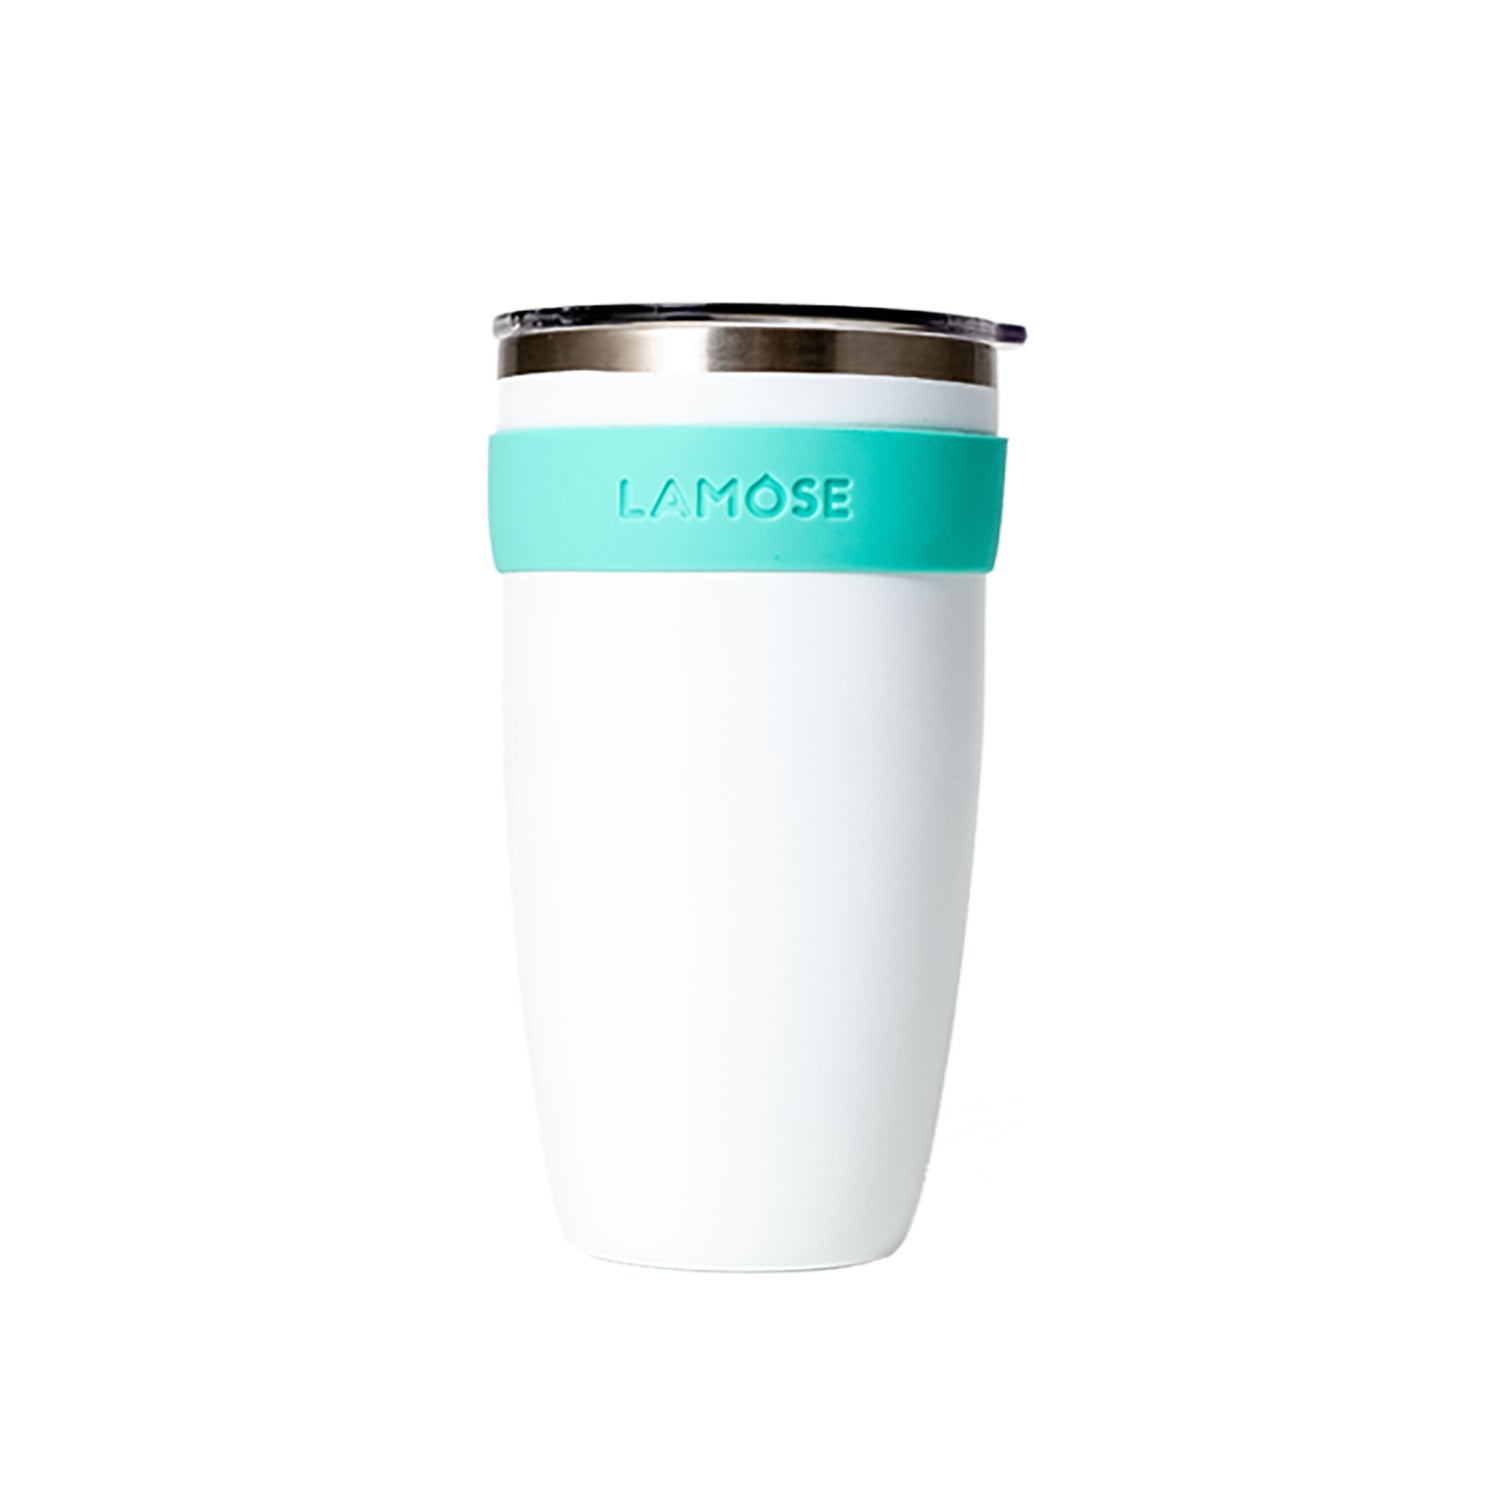 LAMOSE Peyto Sleeves - Custom fit for the Peyto 14oz bottle. Enhanced grip, color variety, durable design, easy maintenance. Stylish and practical, eco-friendly choice. Comfortable, fashionable, and versatile. Elevate your drinking experience today!